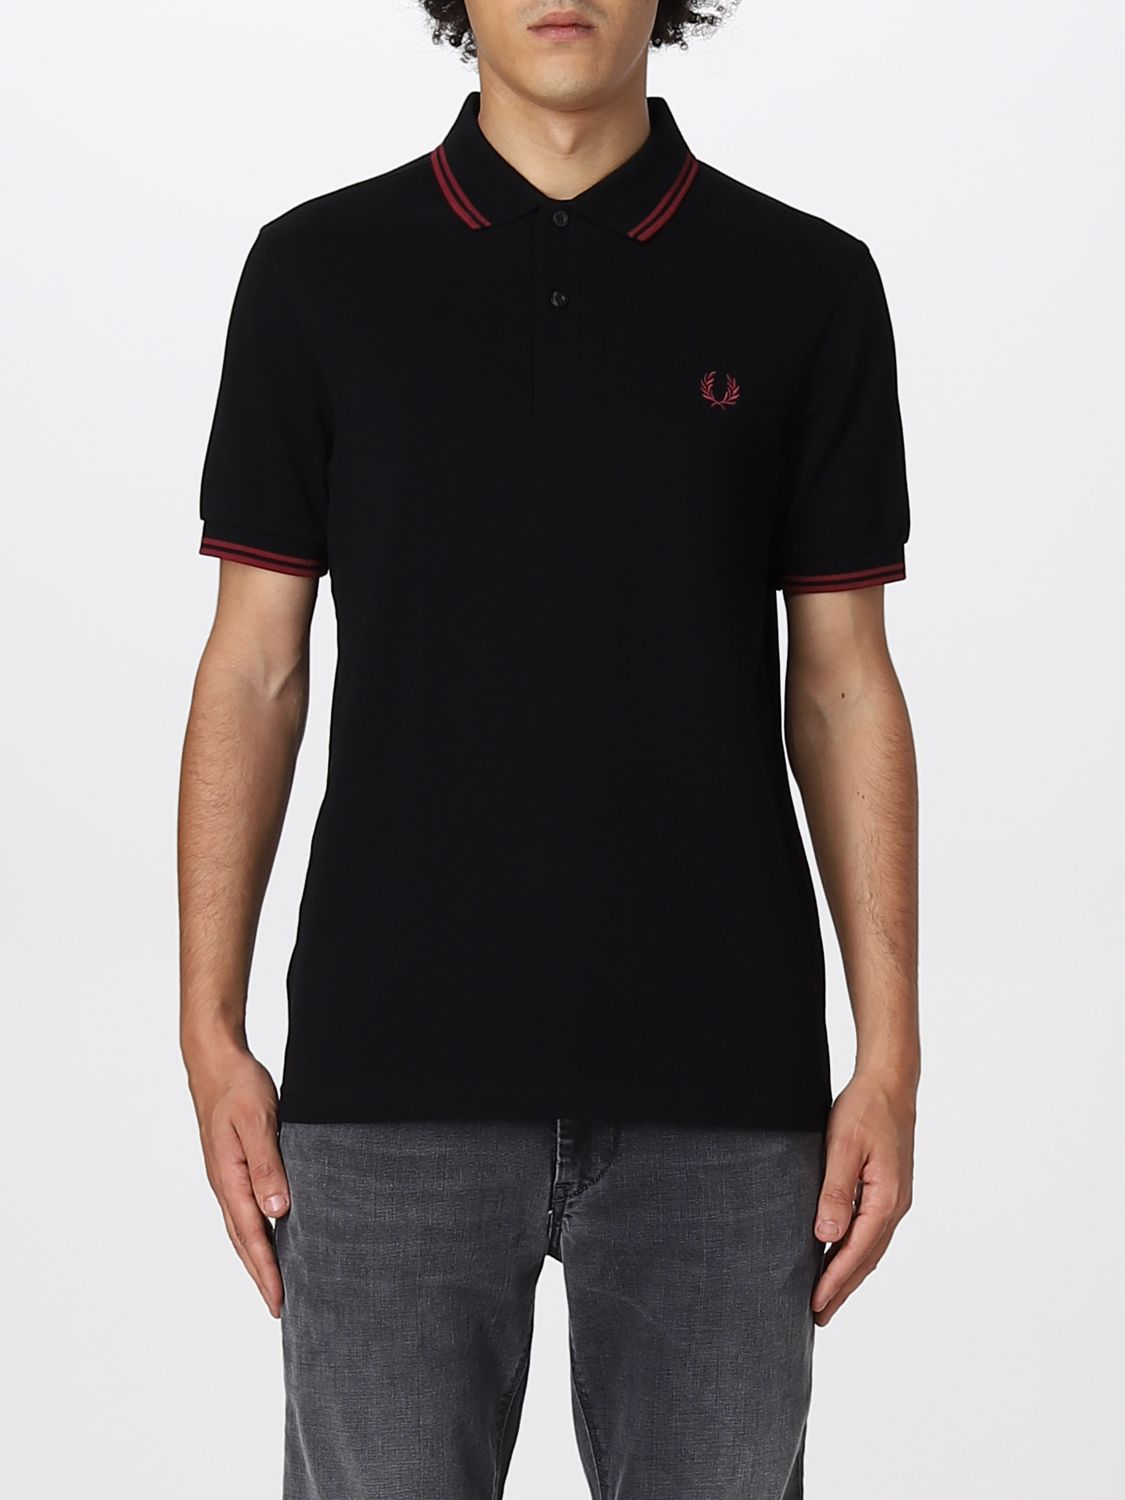 FRED PERRY: polo shirt for man - Black | Fred Perry polo shirt ...